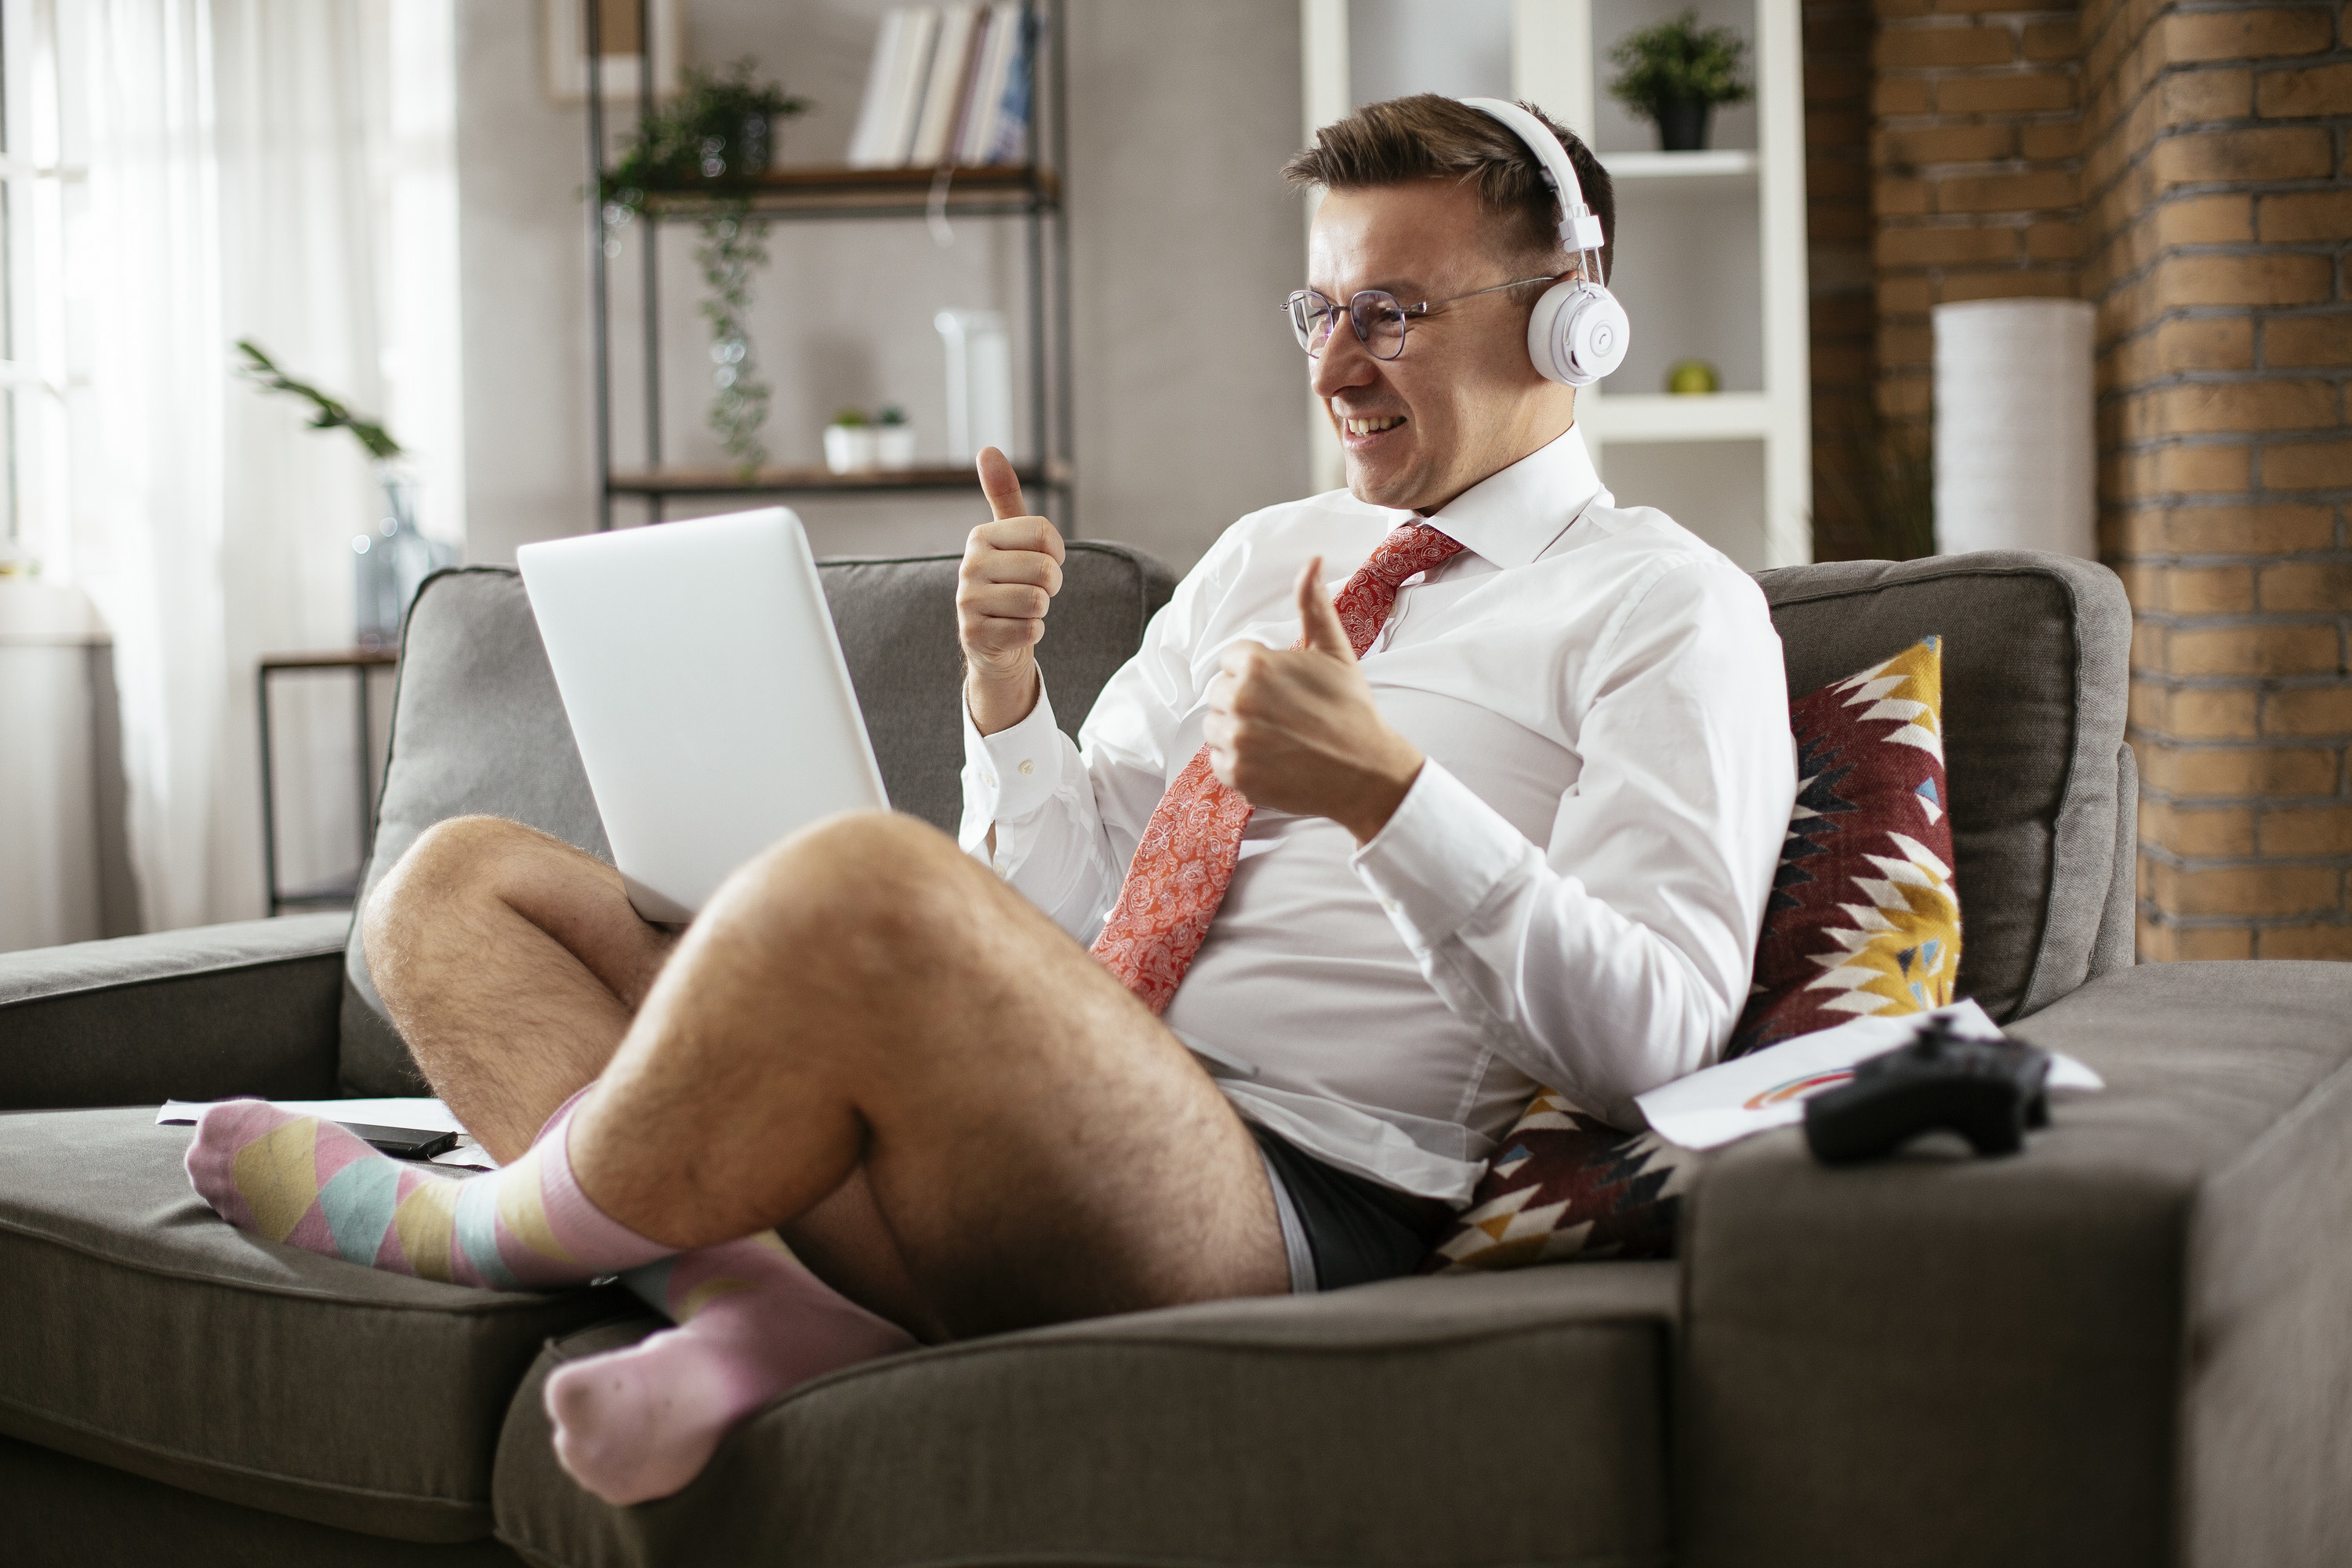 man working from home wearing a dress shirt and tie on the top and underwear on the bottom